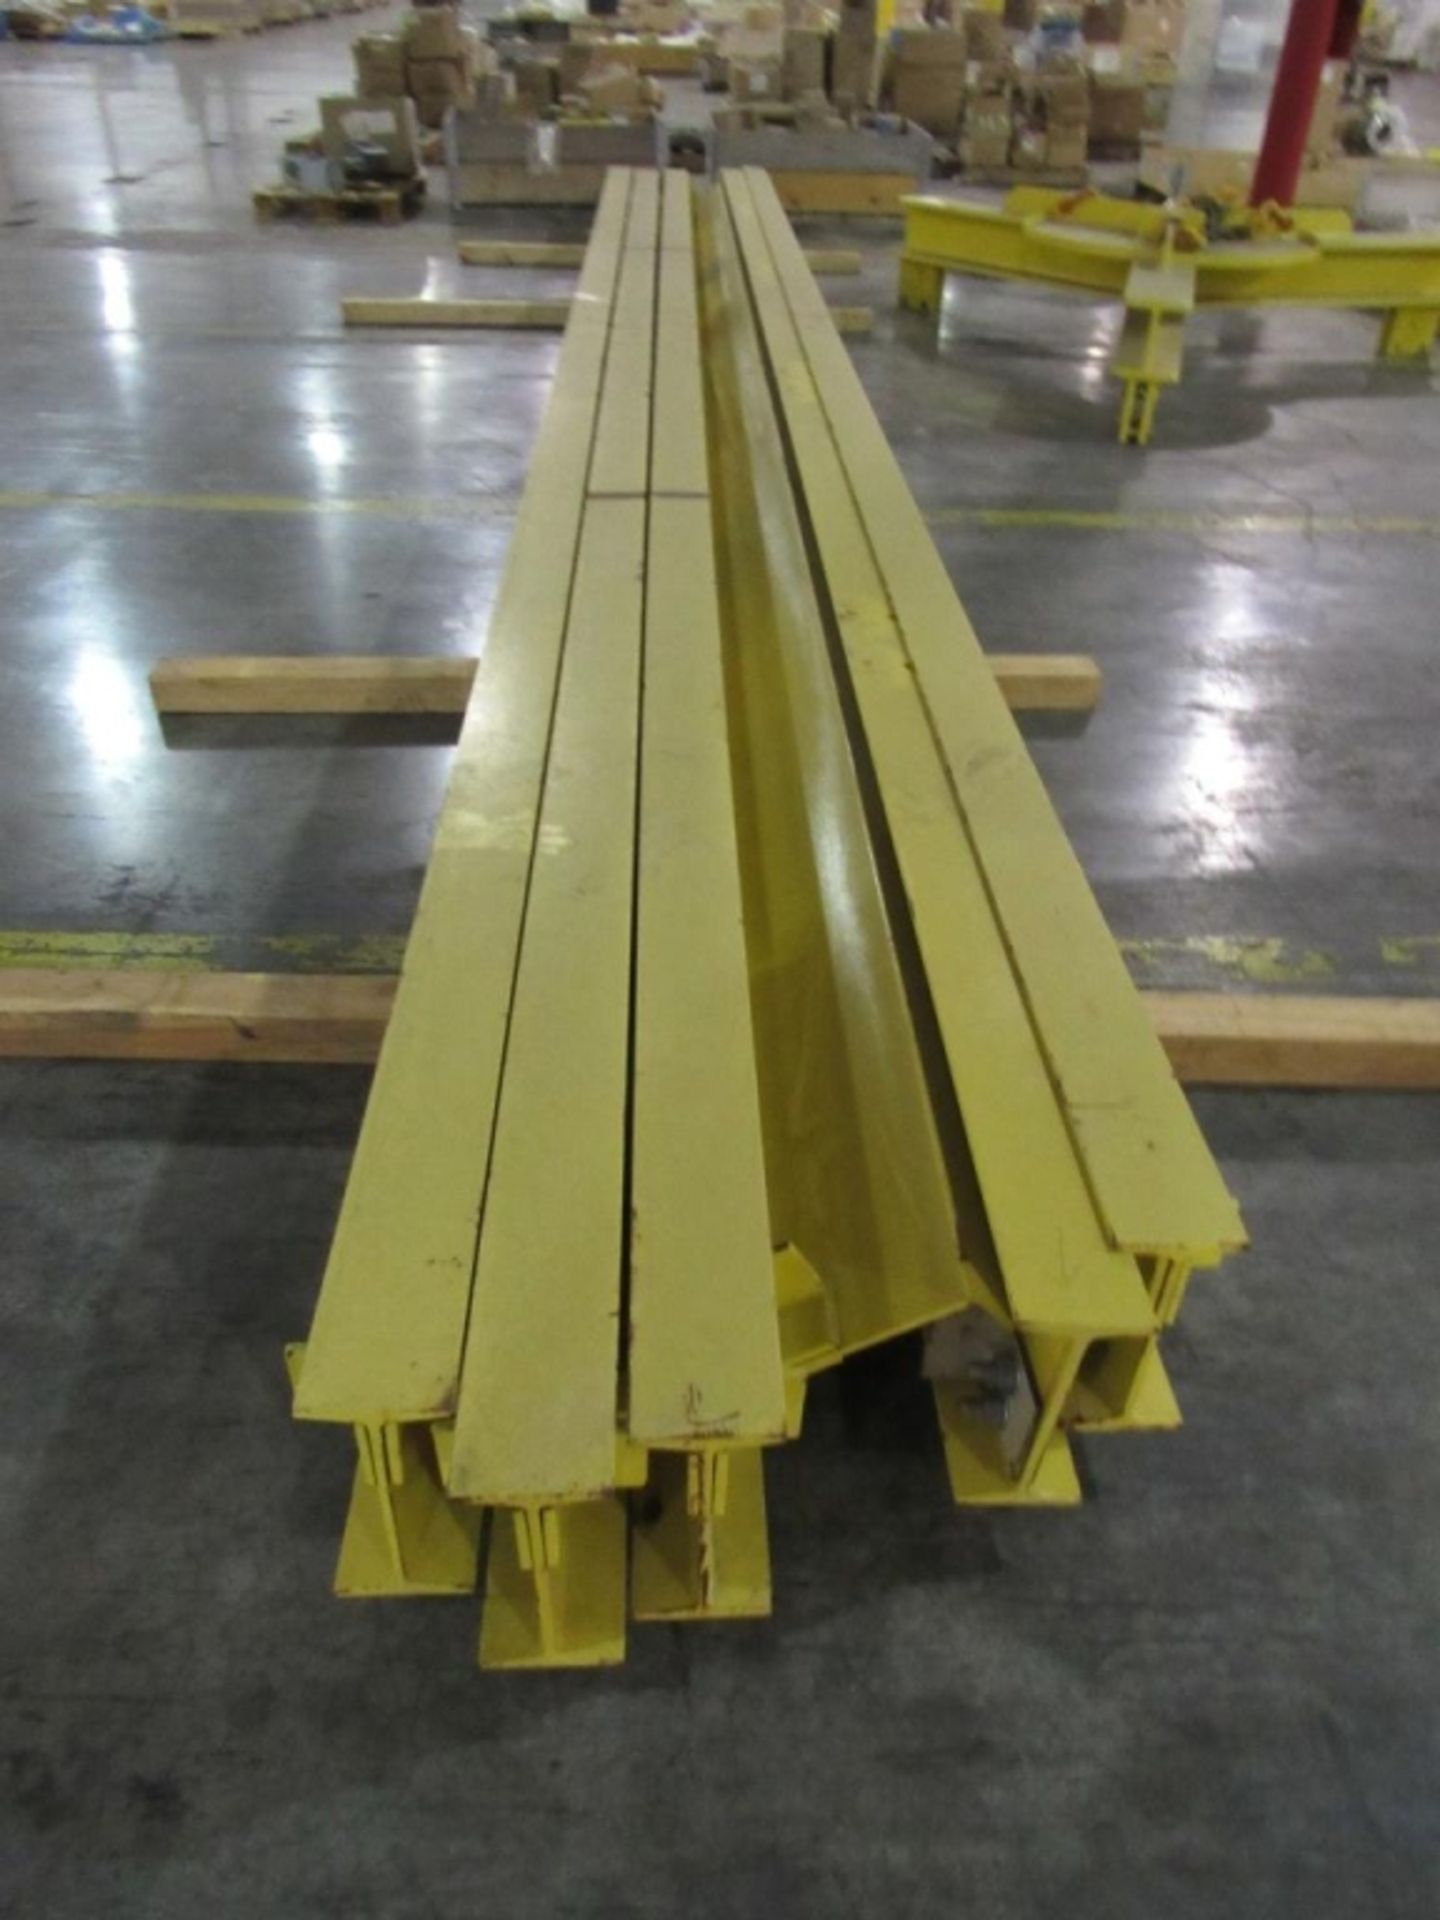 Overhead Crane Parts- ***Located in Cleveland, TN*** MFR - Tragfahigkeit (6) Beams/ Supports 25' x - Image 7 of 10